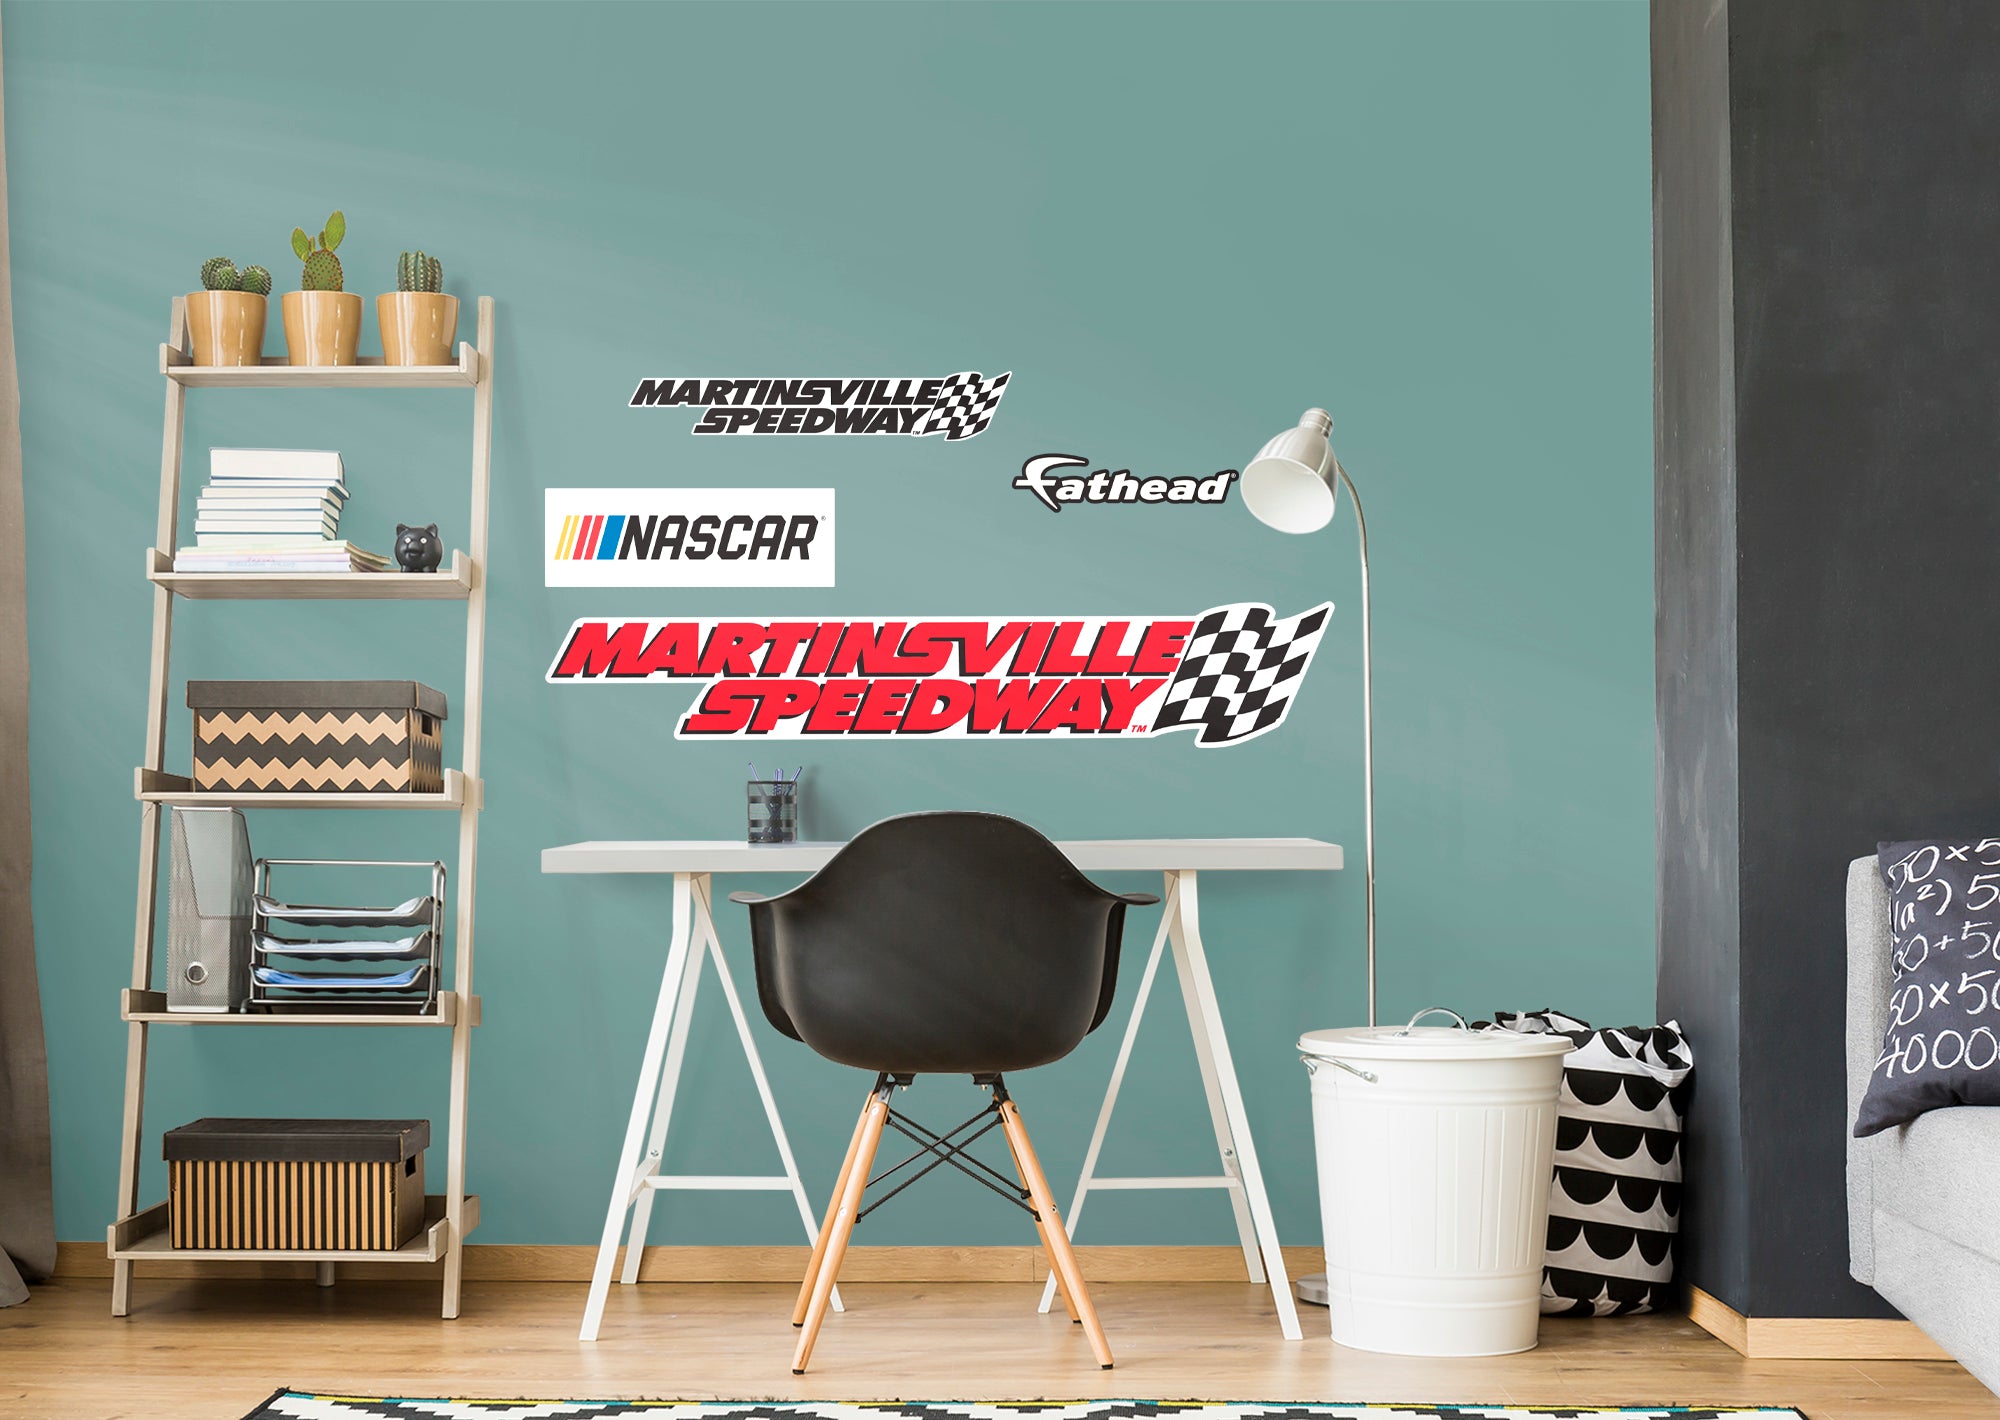 Martinsville Speedway 2021 Logo - Officially Licensed NASCAR Removable Wall Decal Giant Logo + 3 Decals (55"W x 10"H) by Fathead